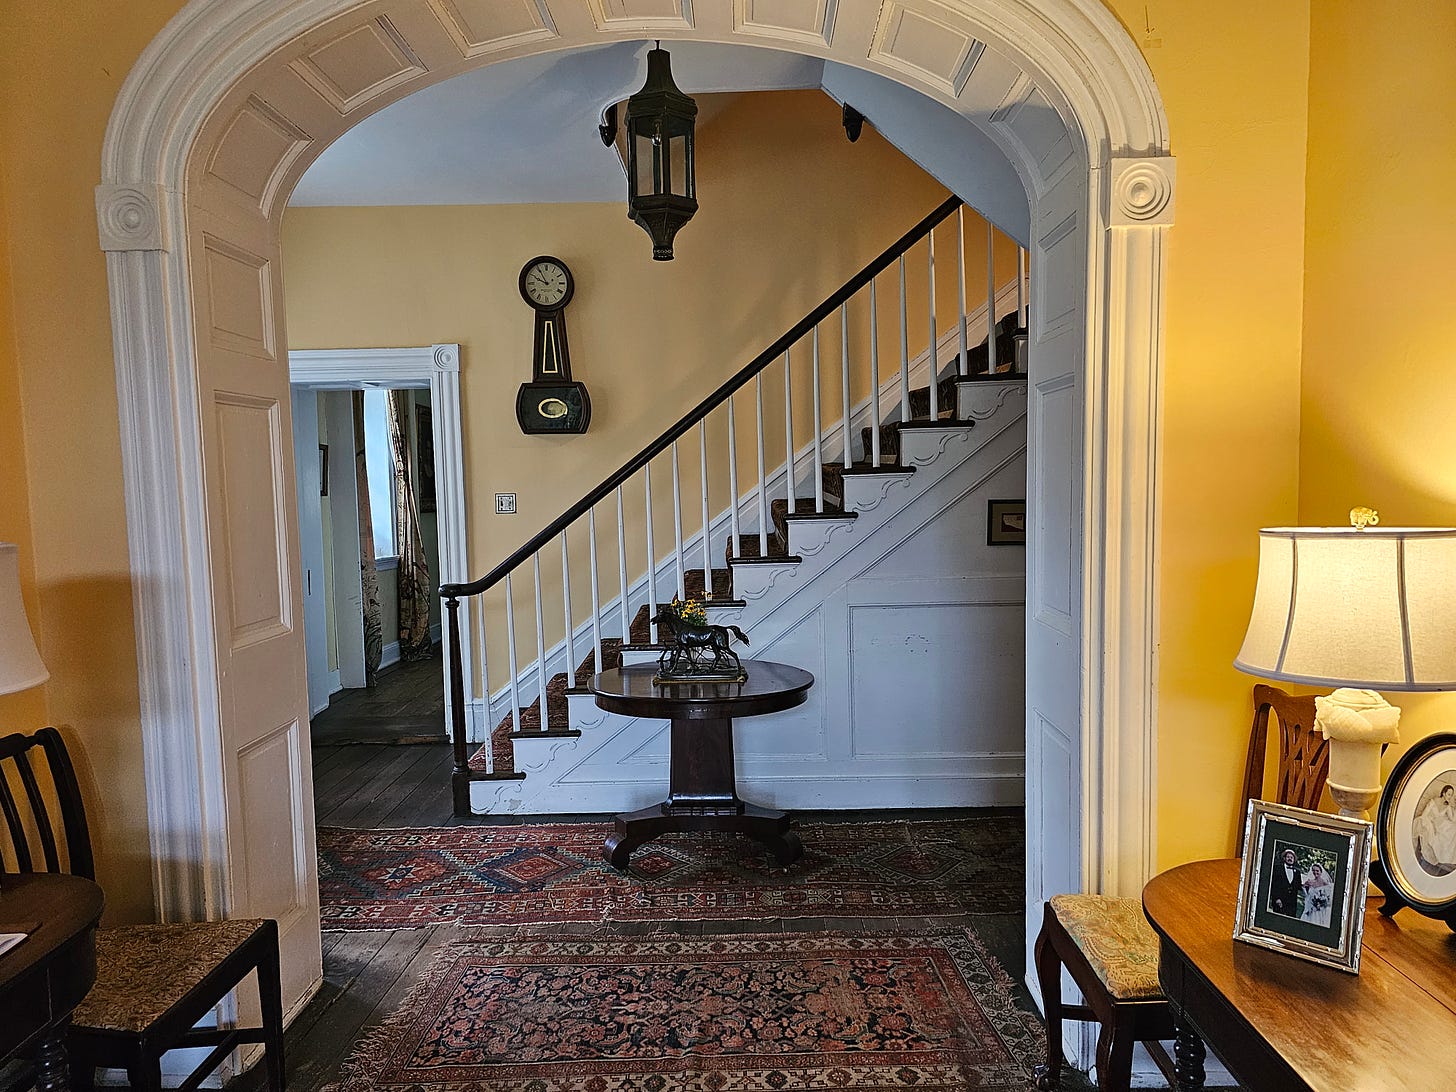 an arched doorway to the stairway, with yellow paint on the walls.